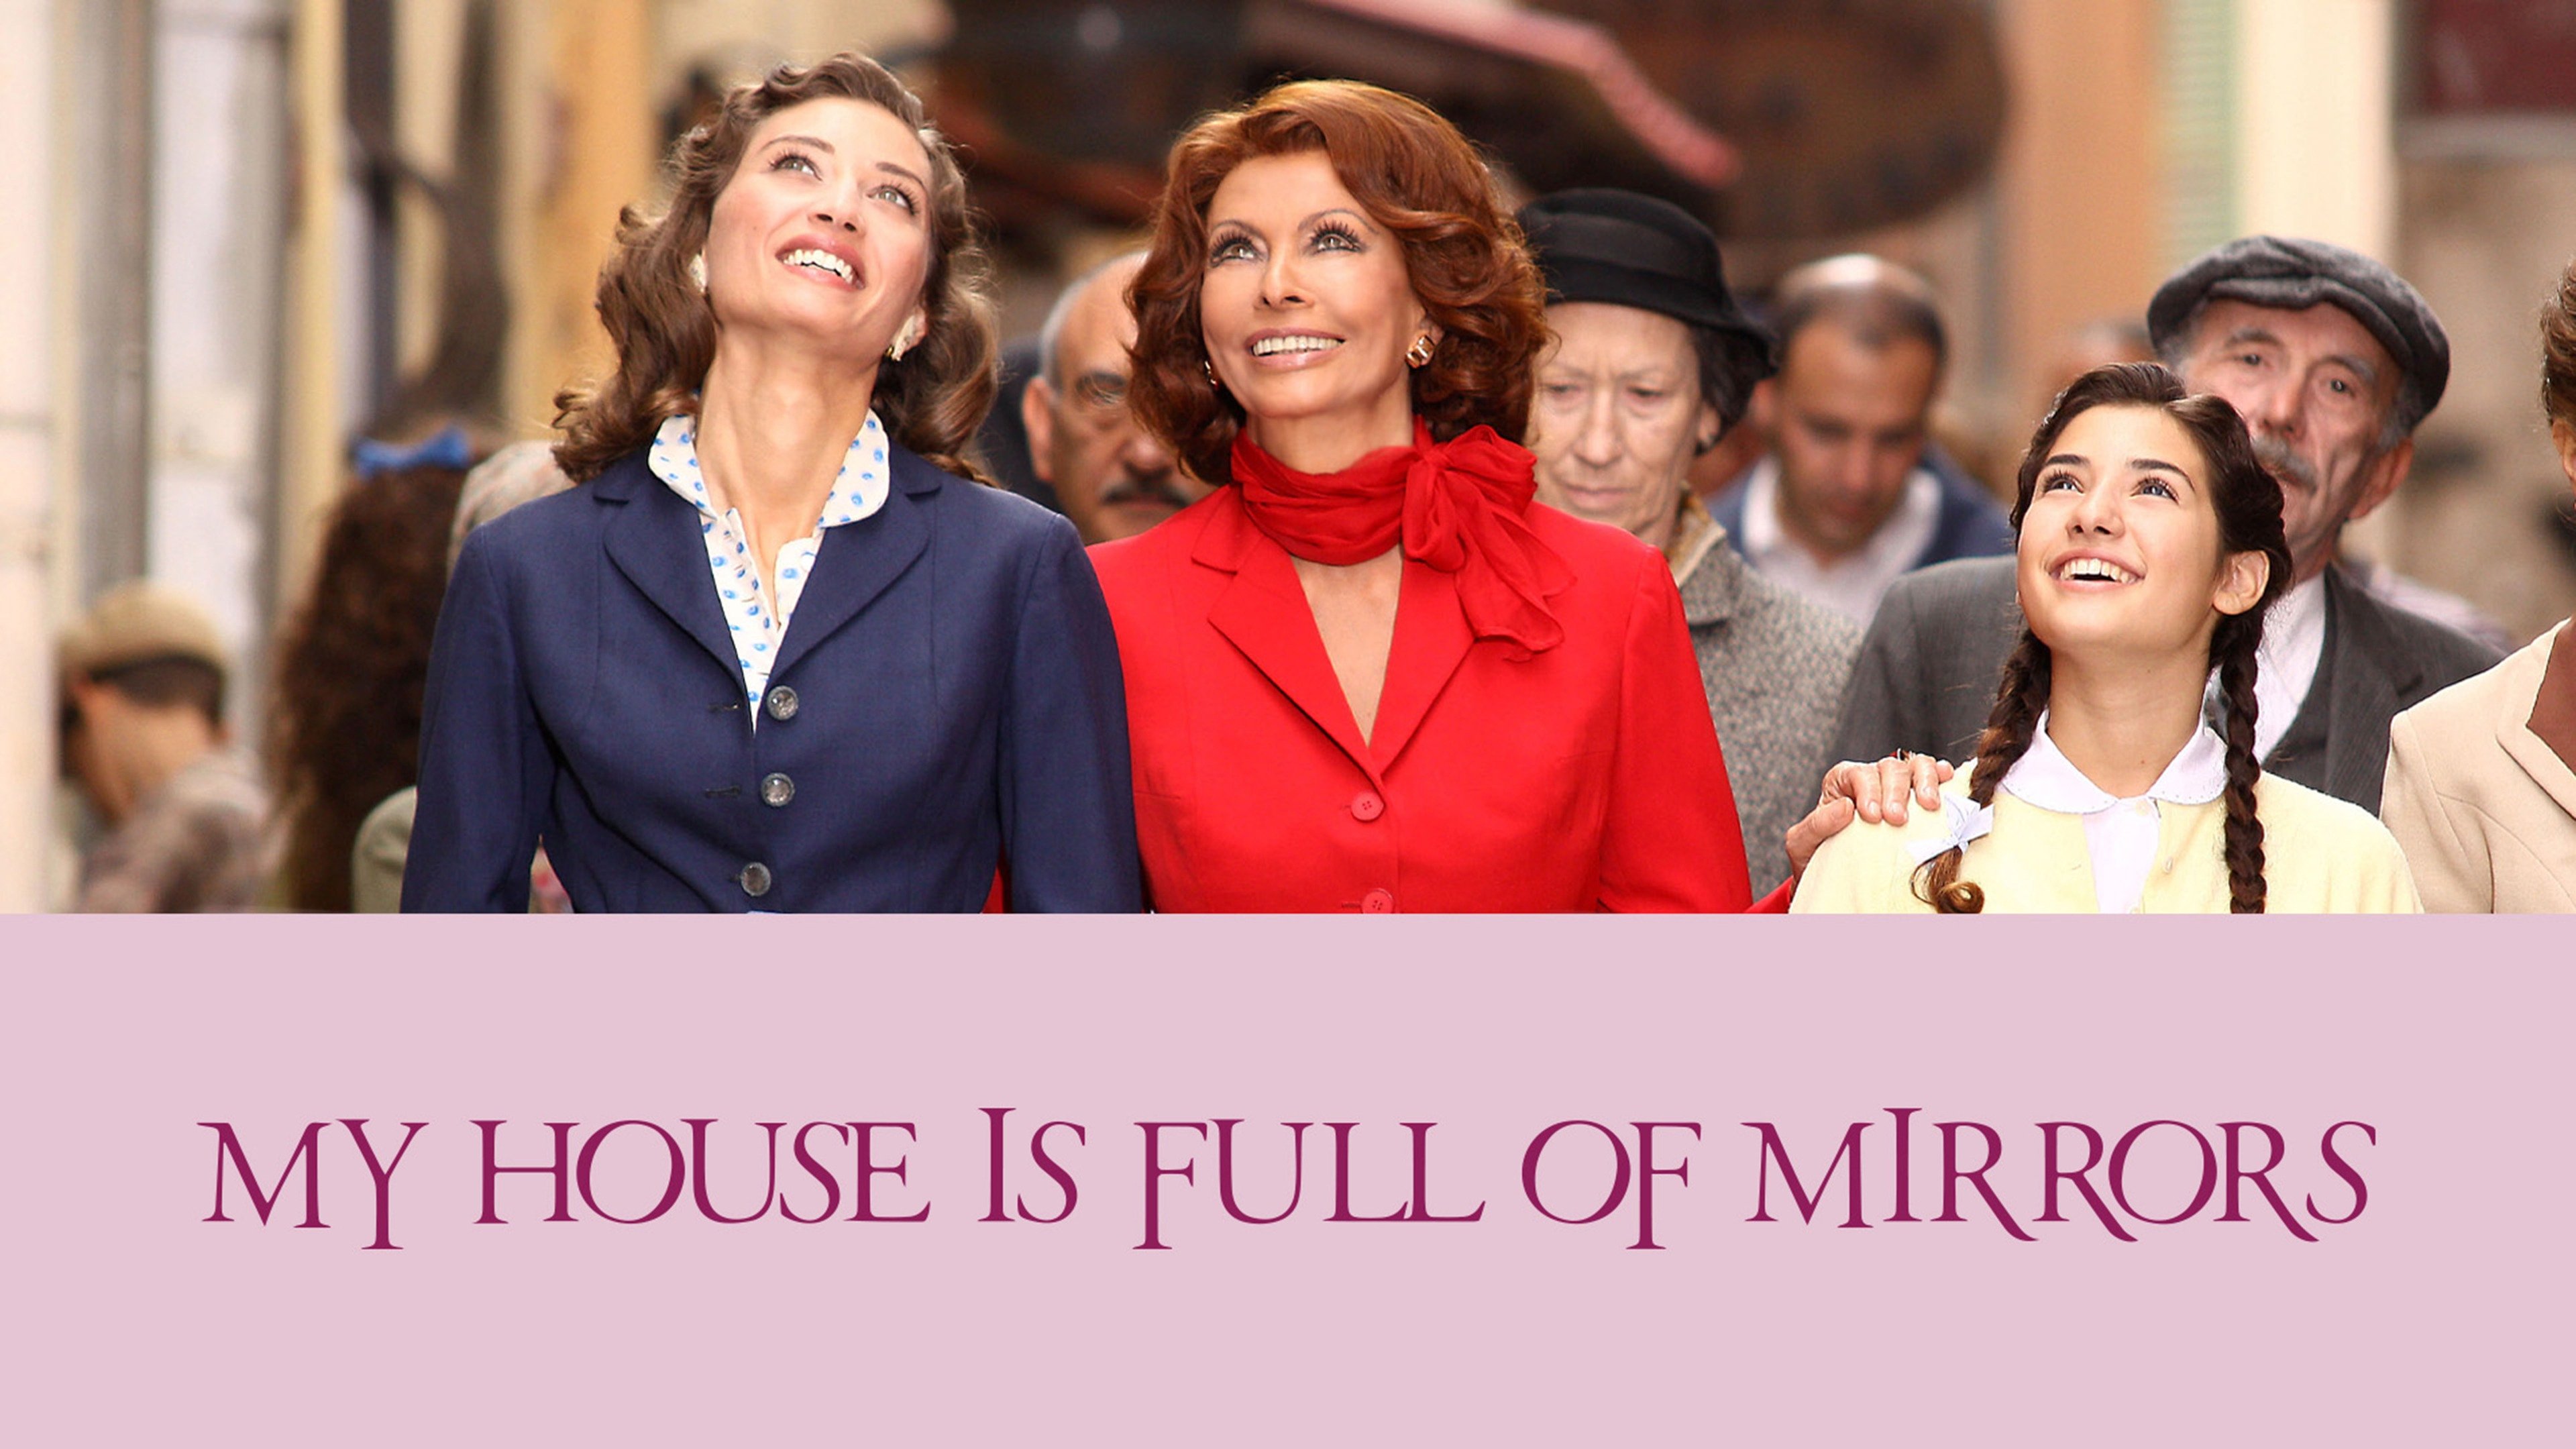 My House Is Full of Mirrors - MHz Choice Miniseries